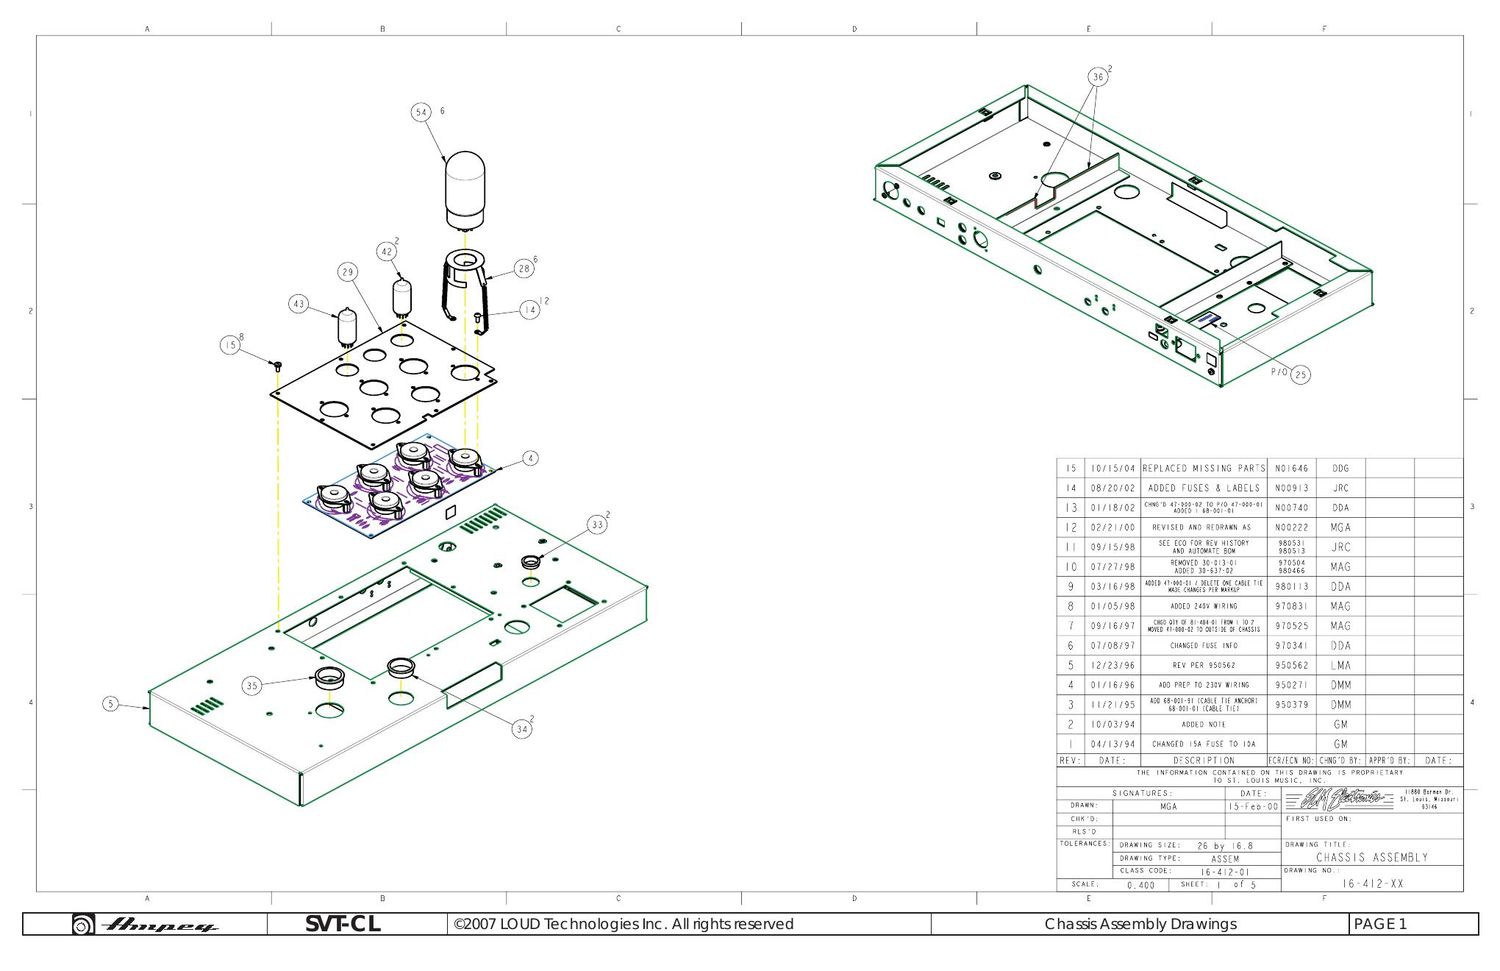 ampeg svt cl assembly drawings